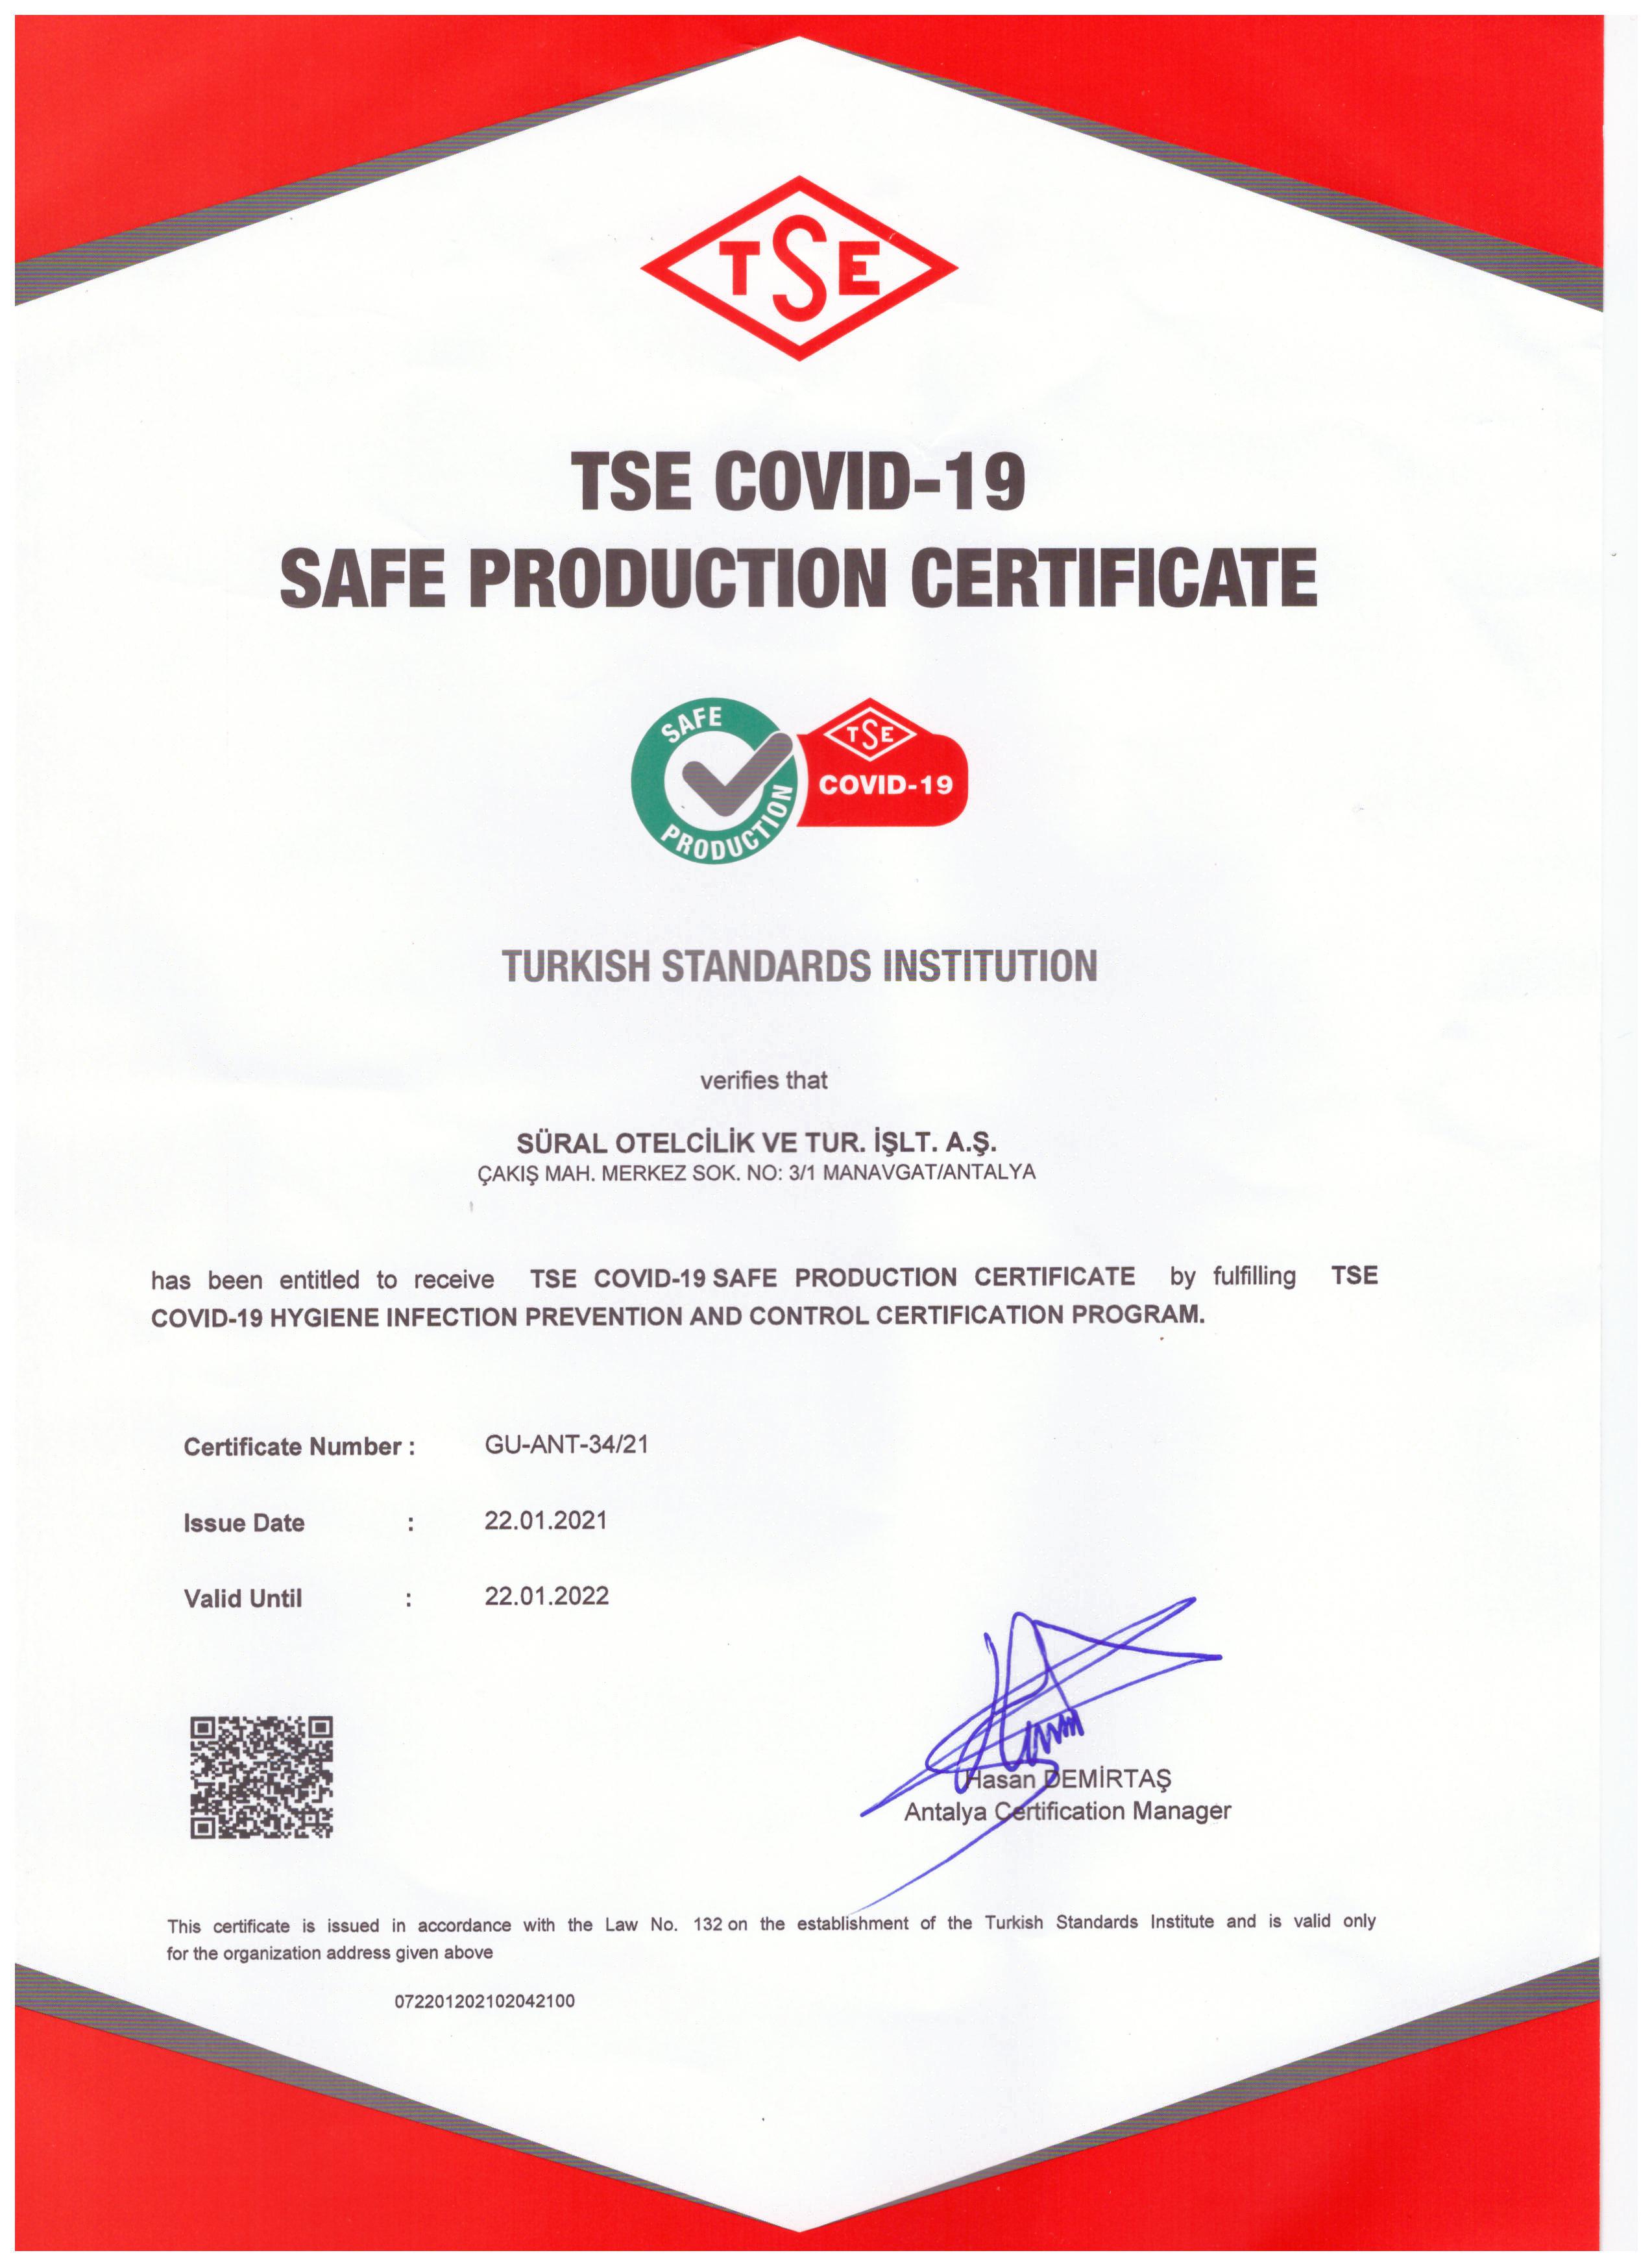 Safe Production Certificate